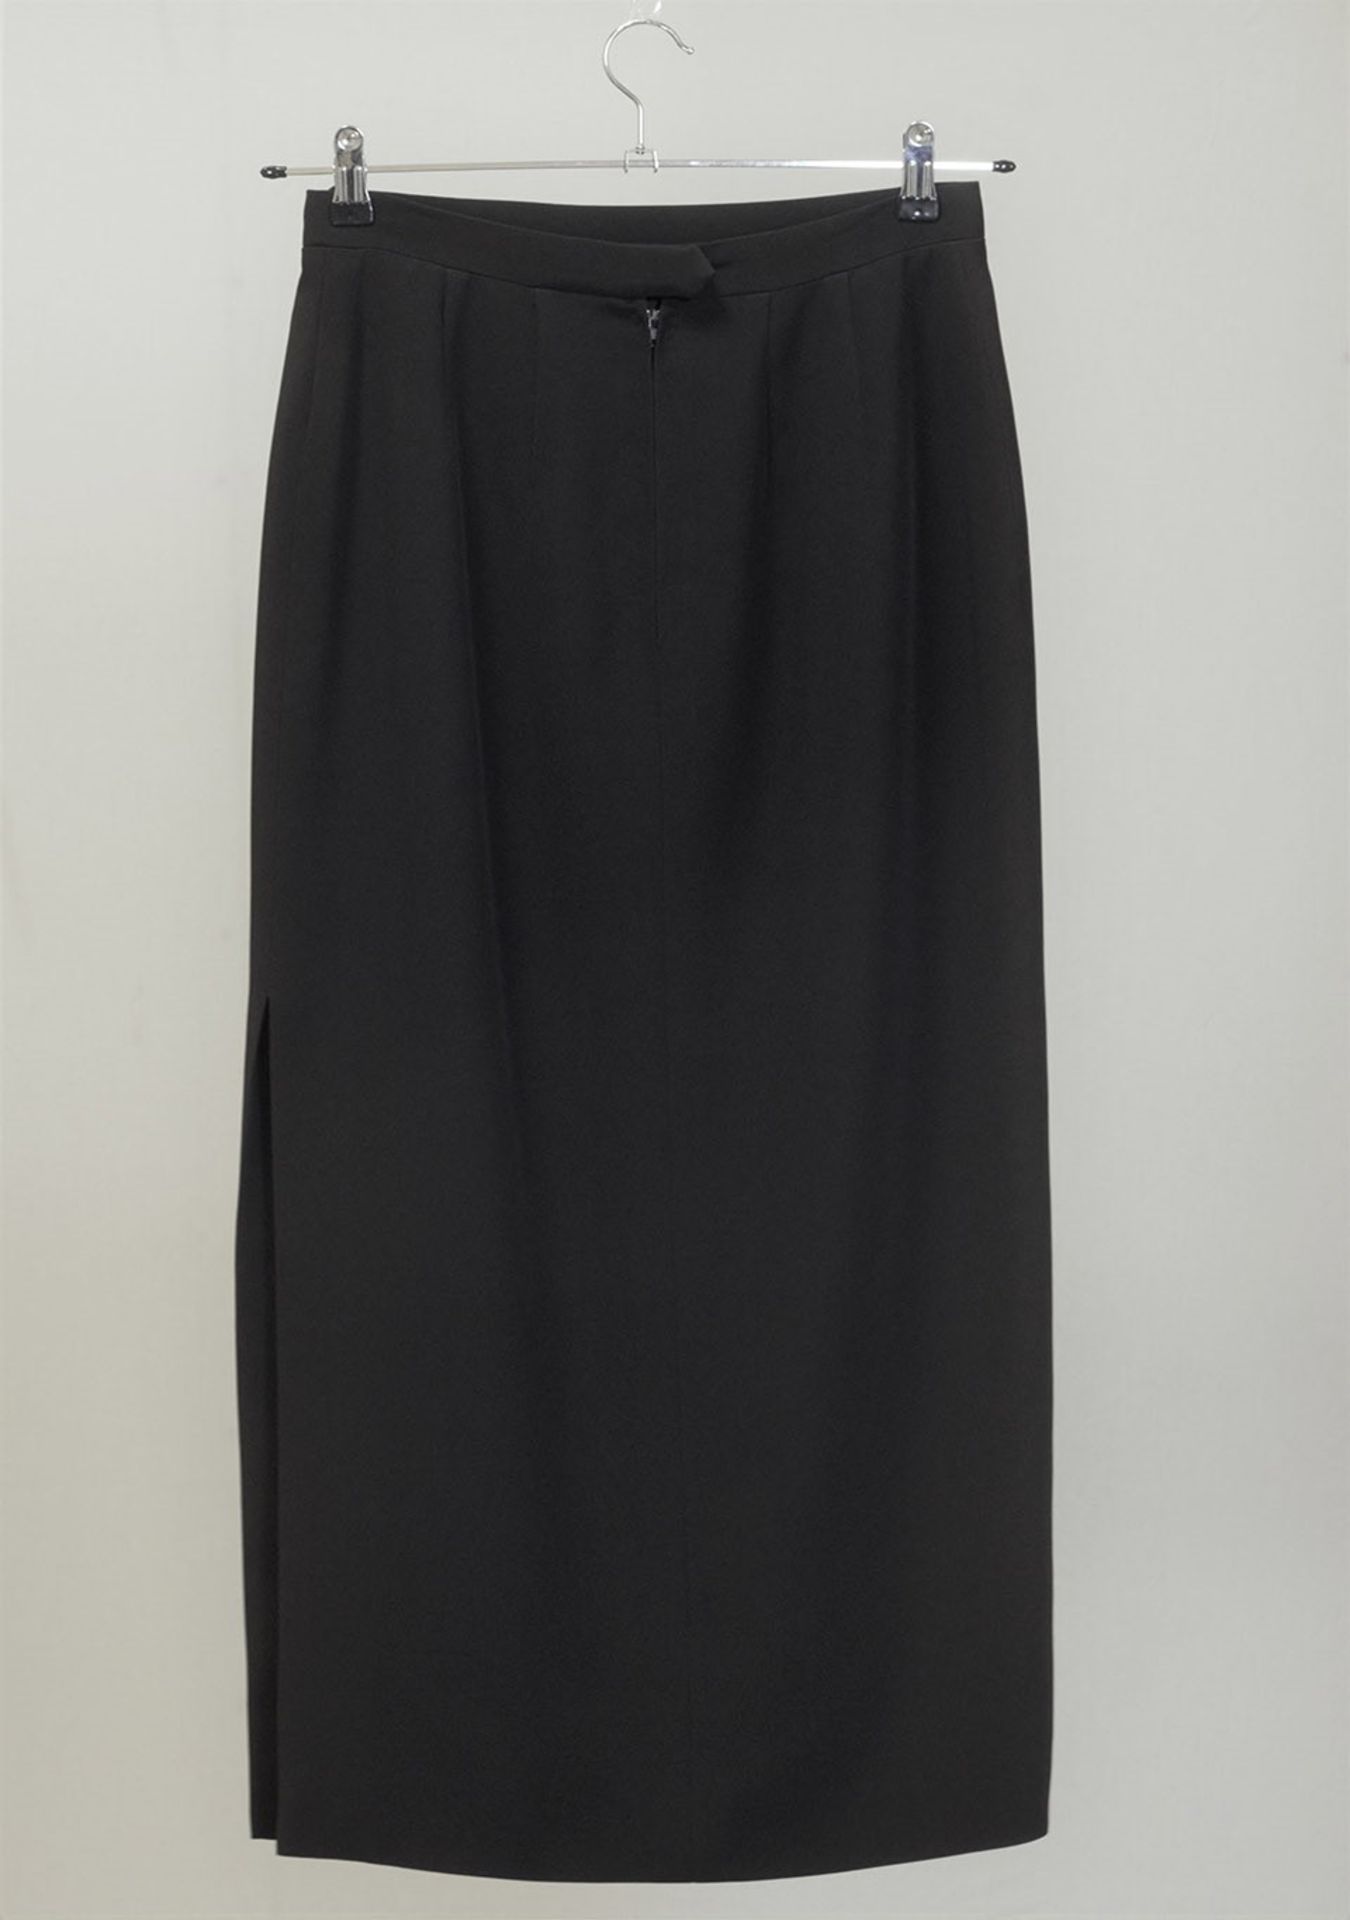 1 x Boutique Le Duc Black Skirt - From a High End Clothing Boutique In The Netherlands - - Image 7 of 7